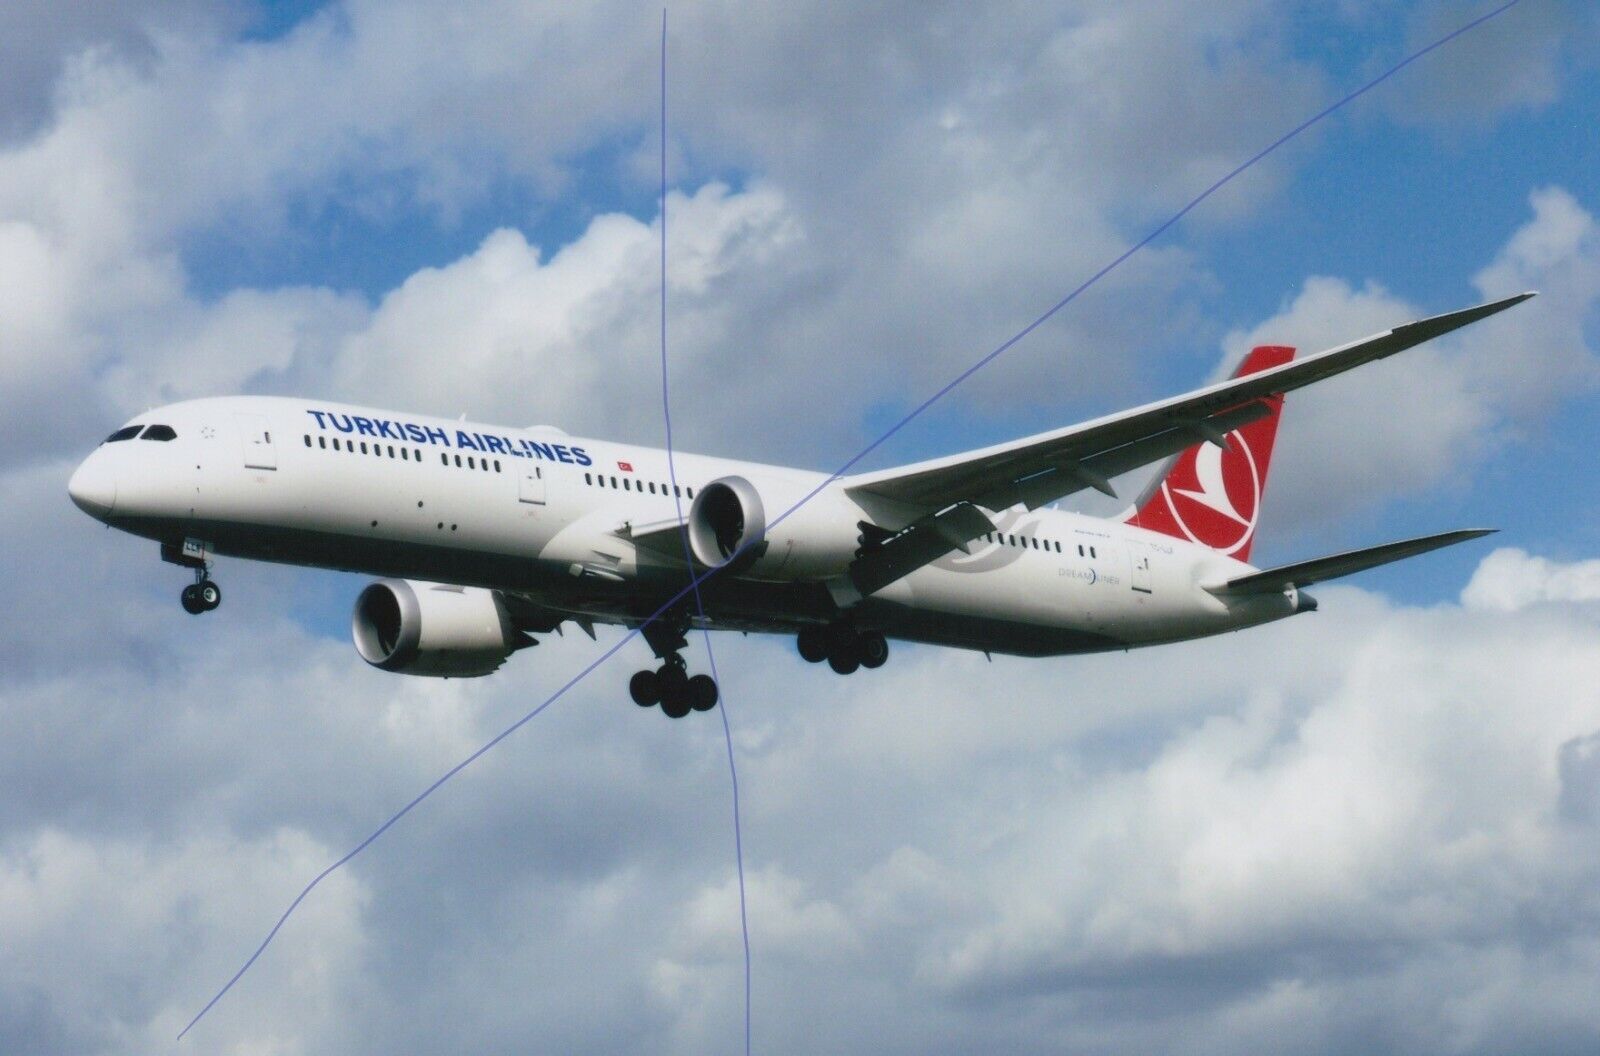 AIRCRAFT PHOTO CIVIL PLANE PICTURE TURKISH AIRLINES TC-LLF BOEING 787 PHOTOGRAPH